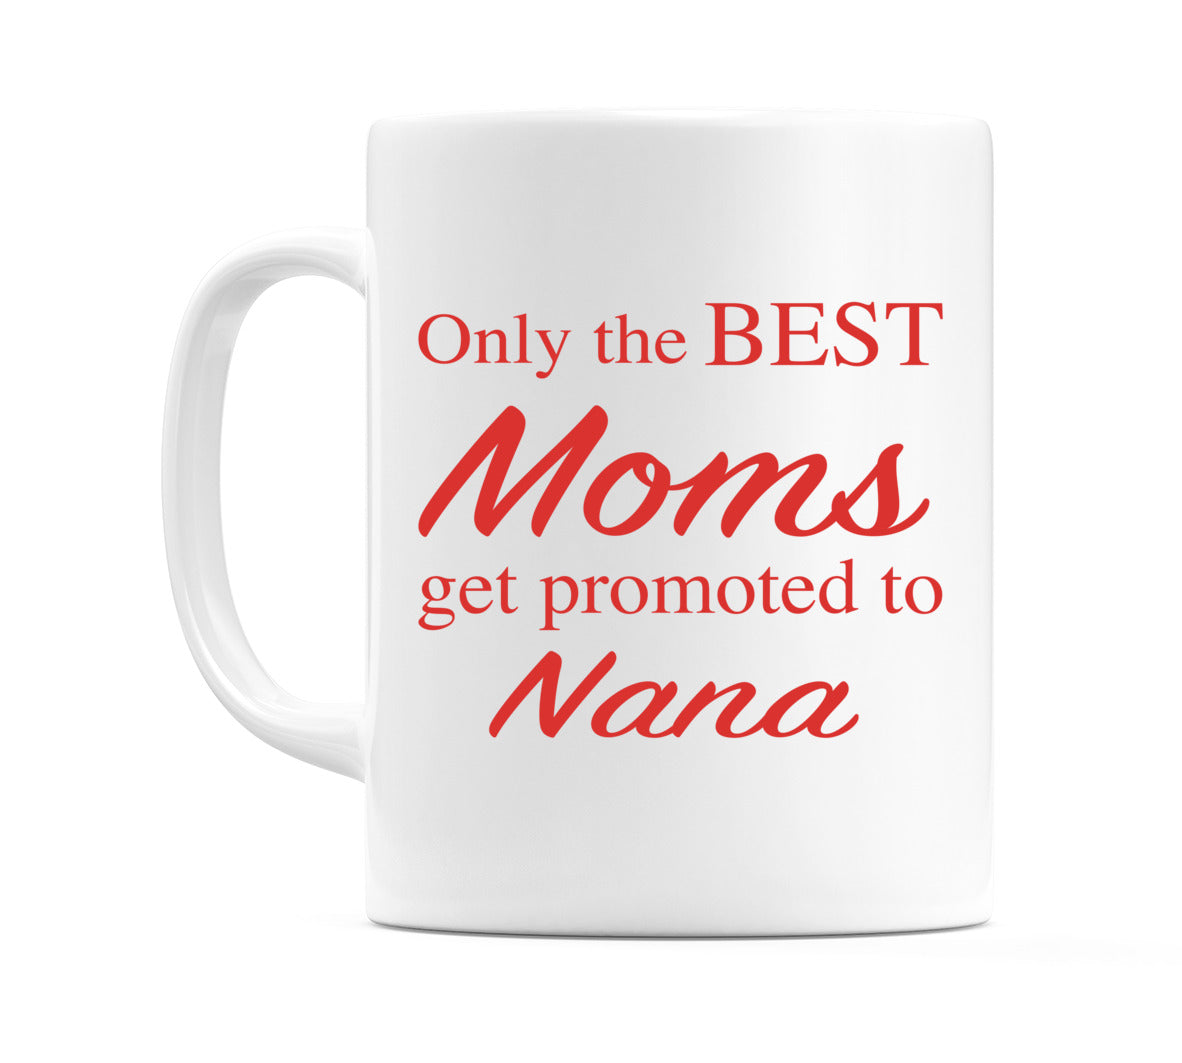 Only the BEST Moms get promoted to Nana Mug